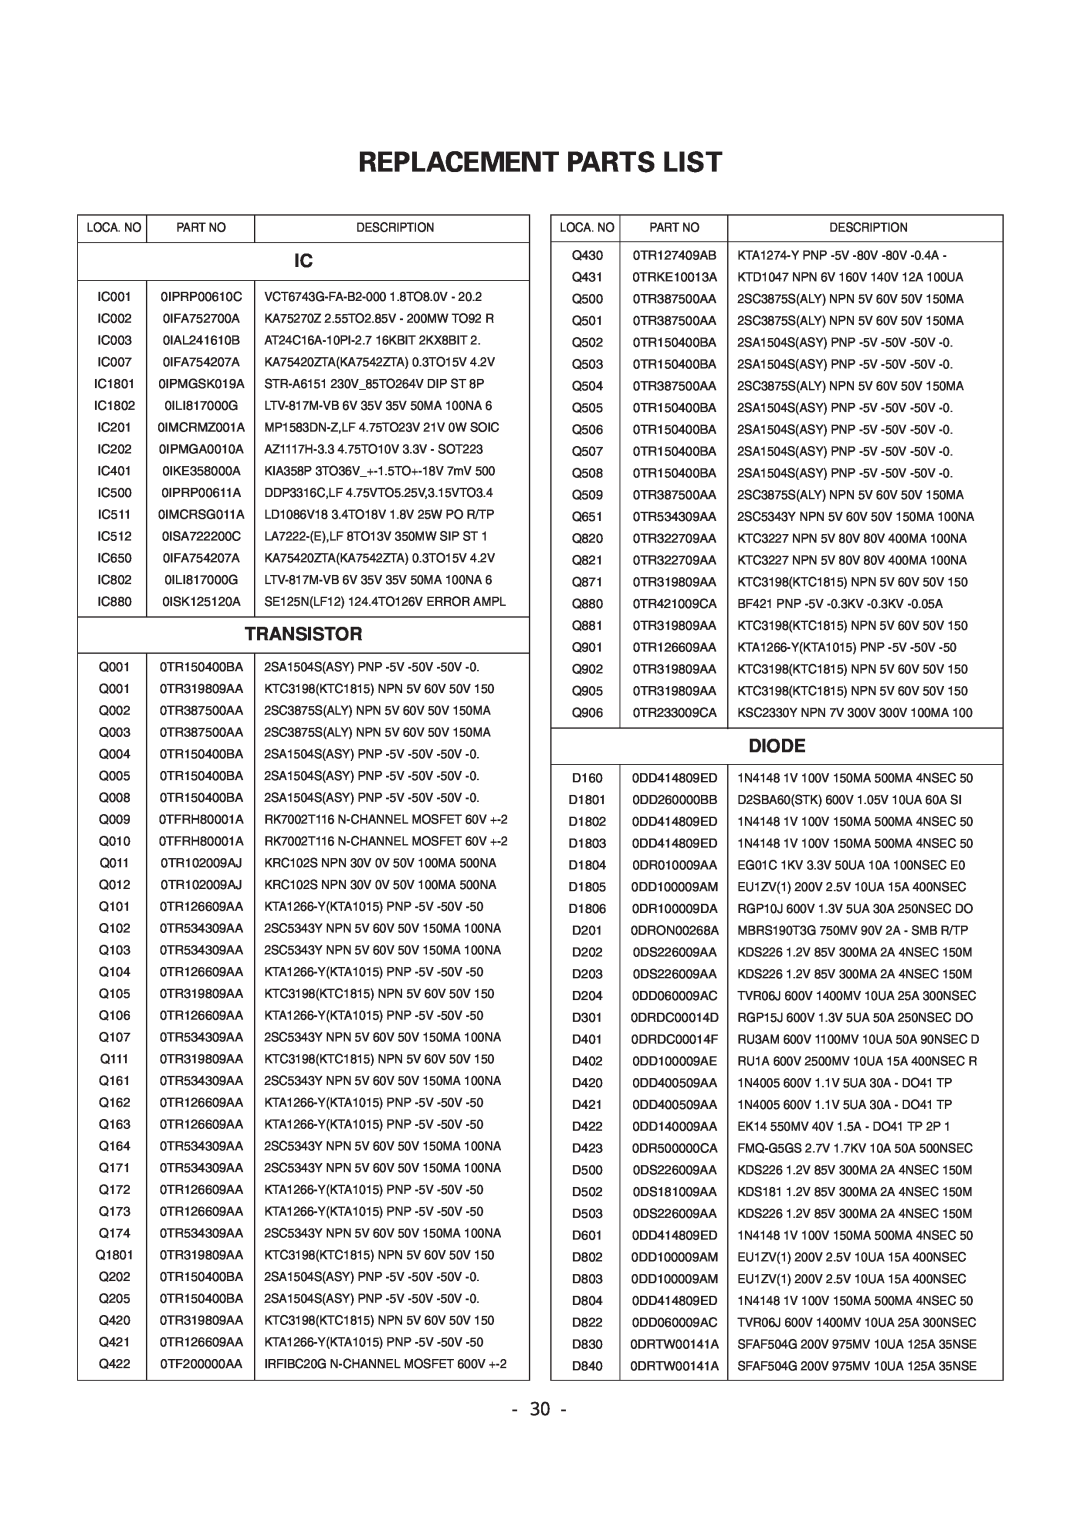 LG Electronics 29FS2AMB/ANX-ZE service manual Replacement Parts List, Transistor, Diode 